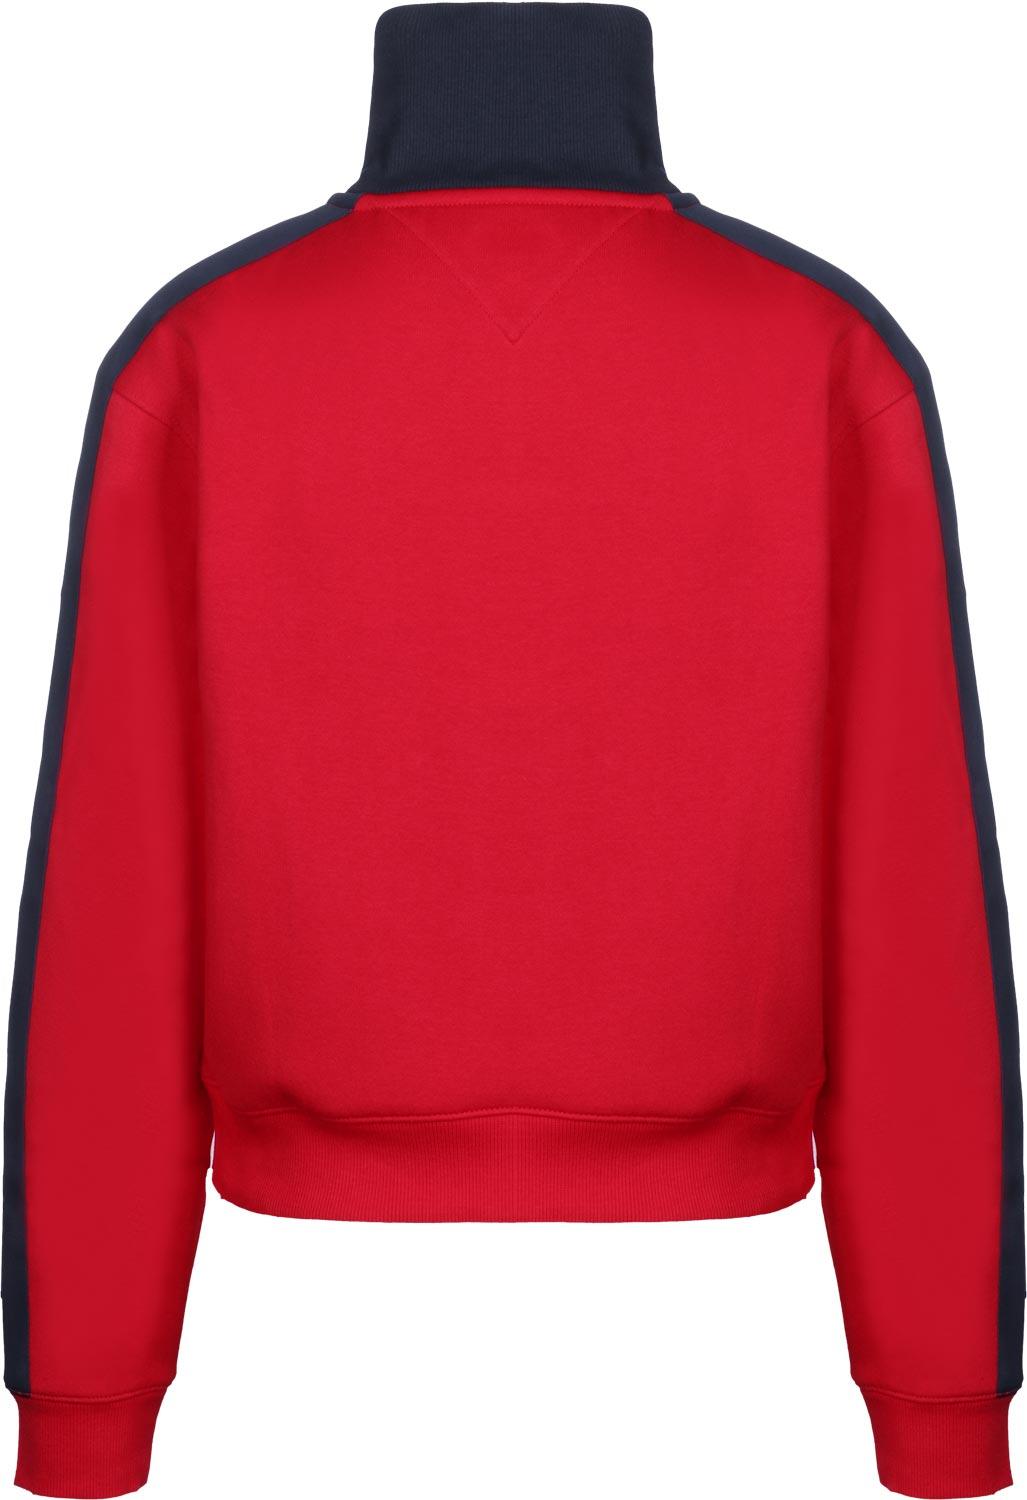 Red and White for the W Logo - Tommy Jeans Racing Logo Pop Over W sweater red blue white